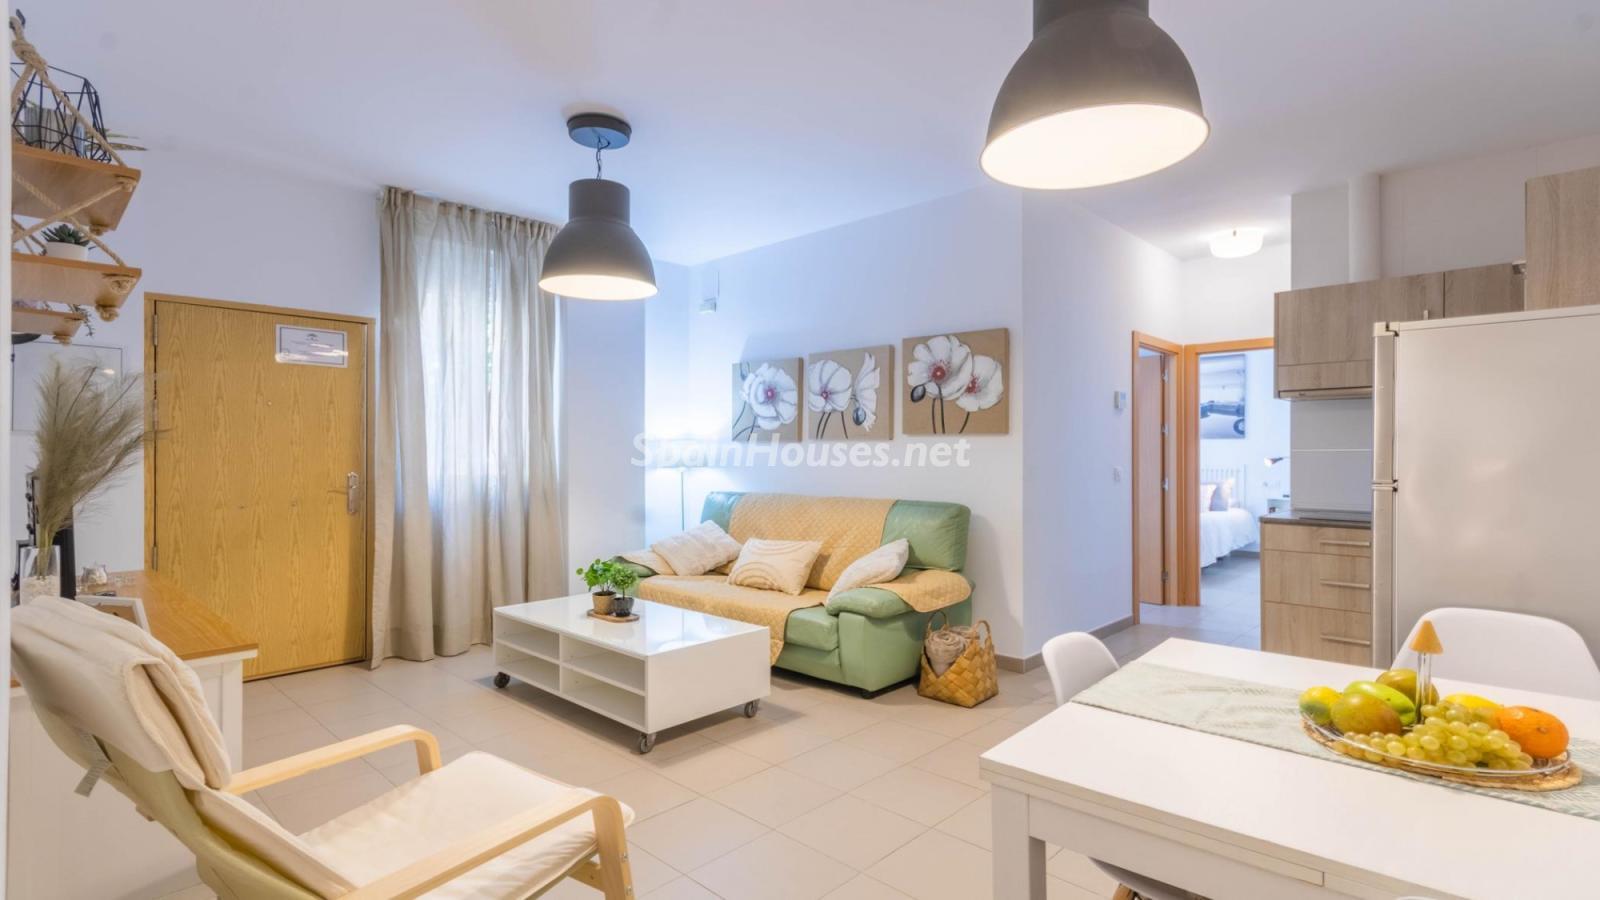 2 bedrooms rooms apartment in  Spain